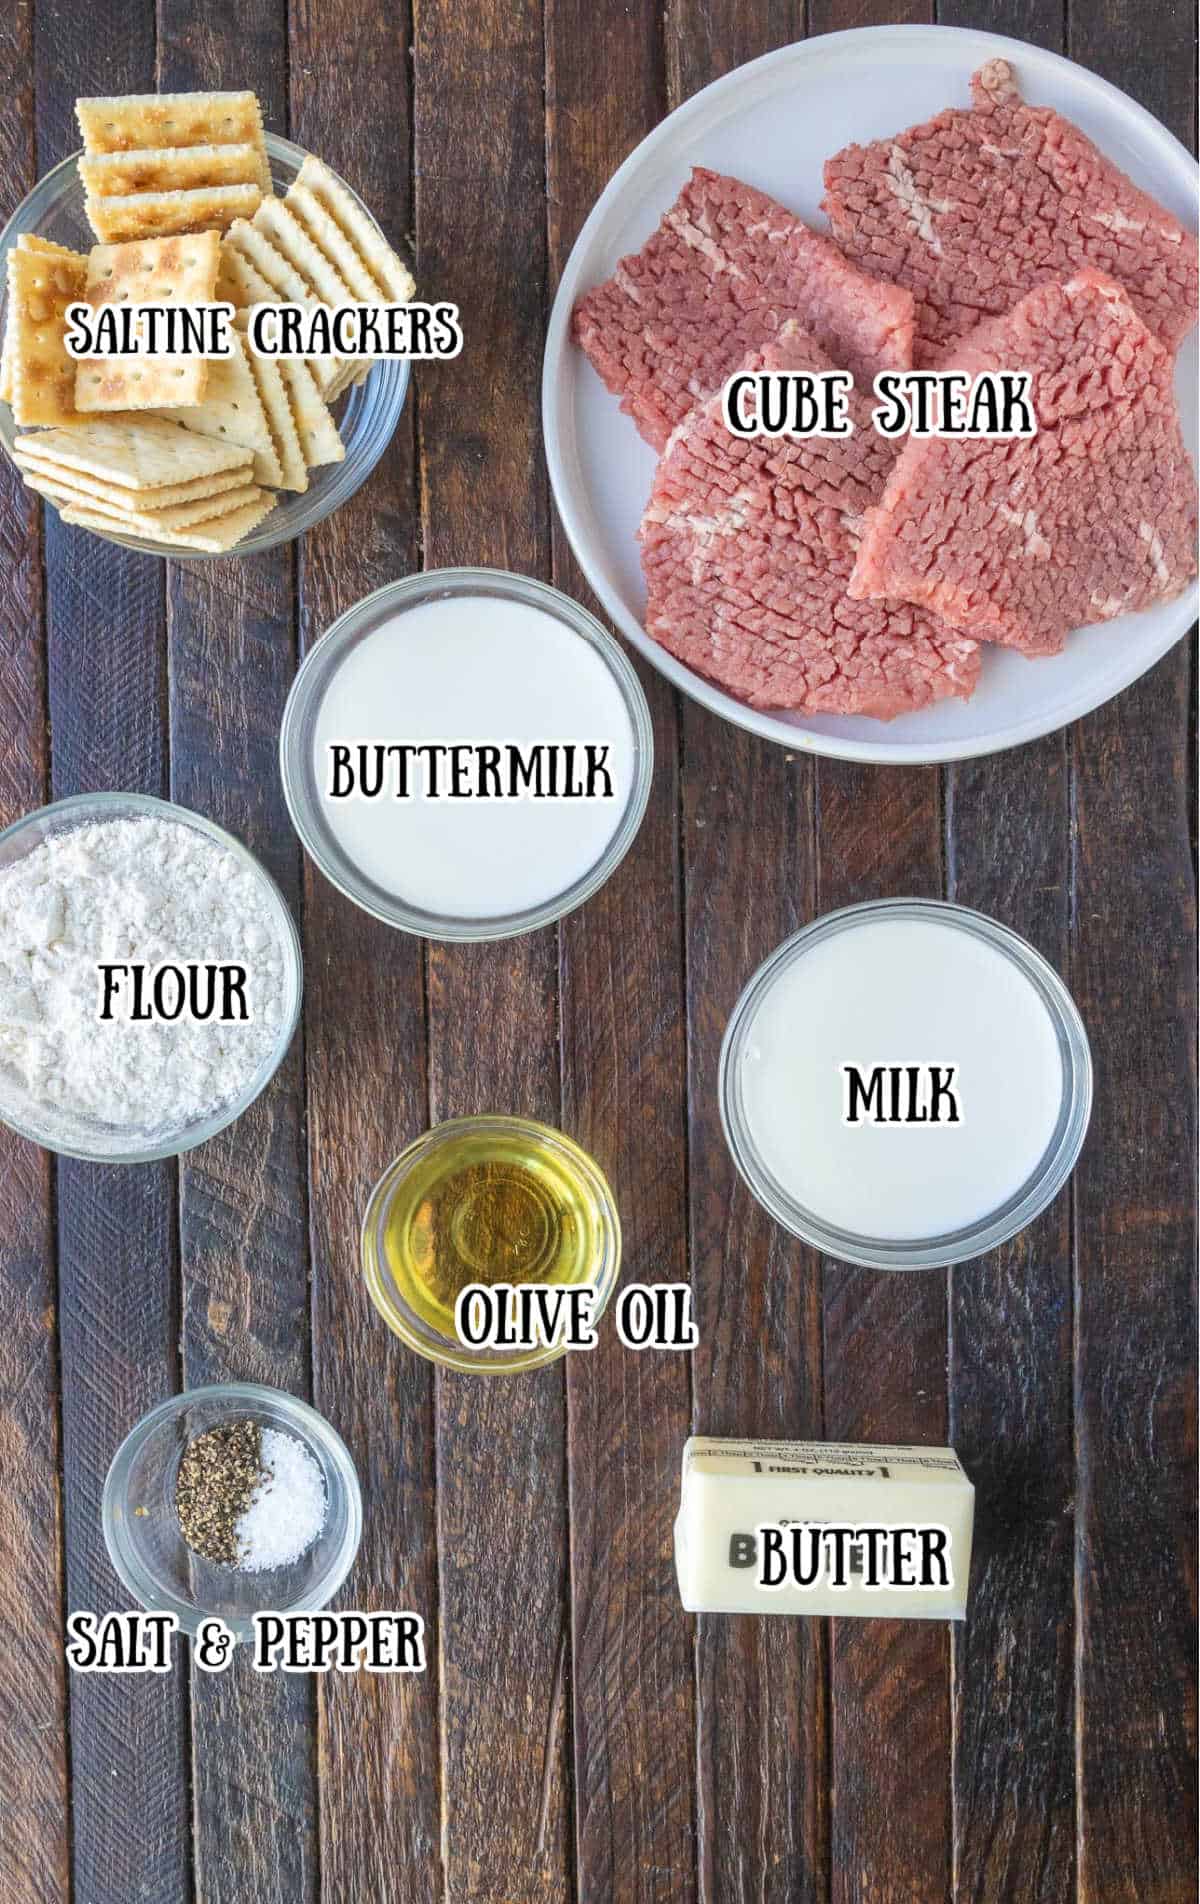 Labeled ingredients for Texas roadhouse chicken fried steak.